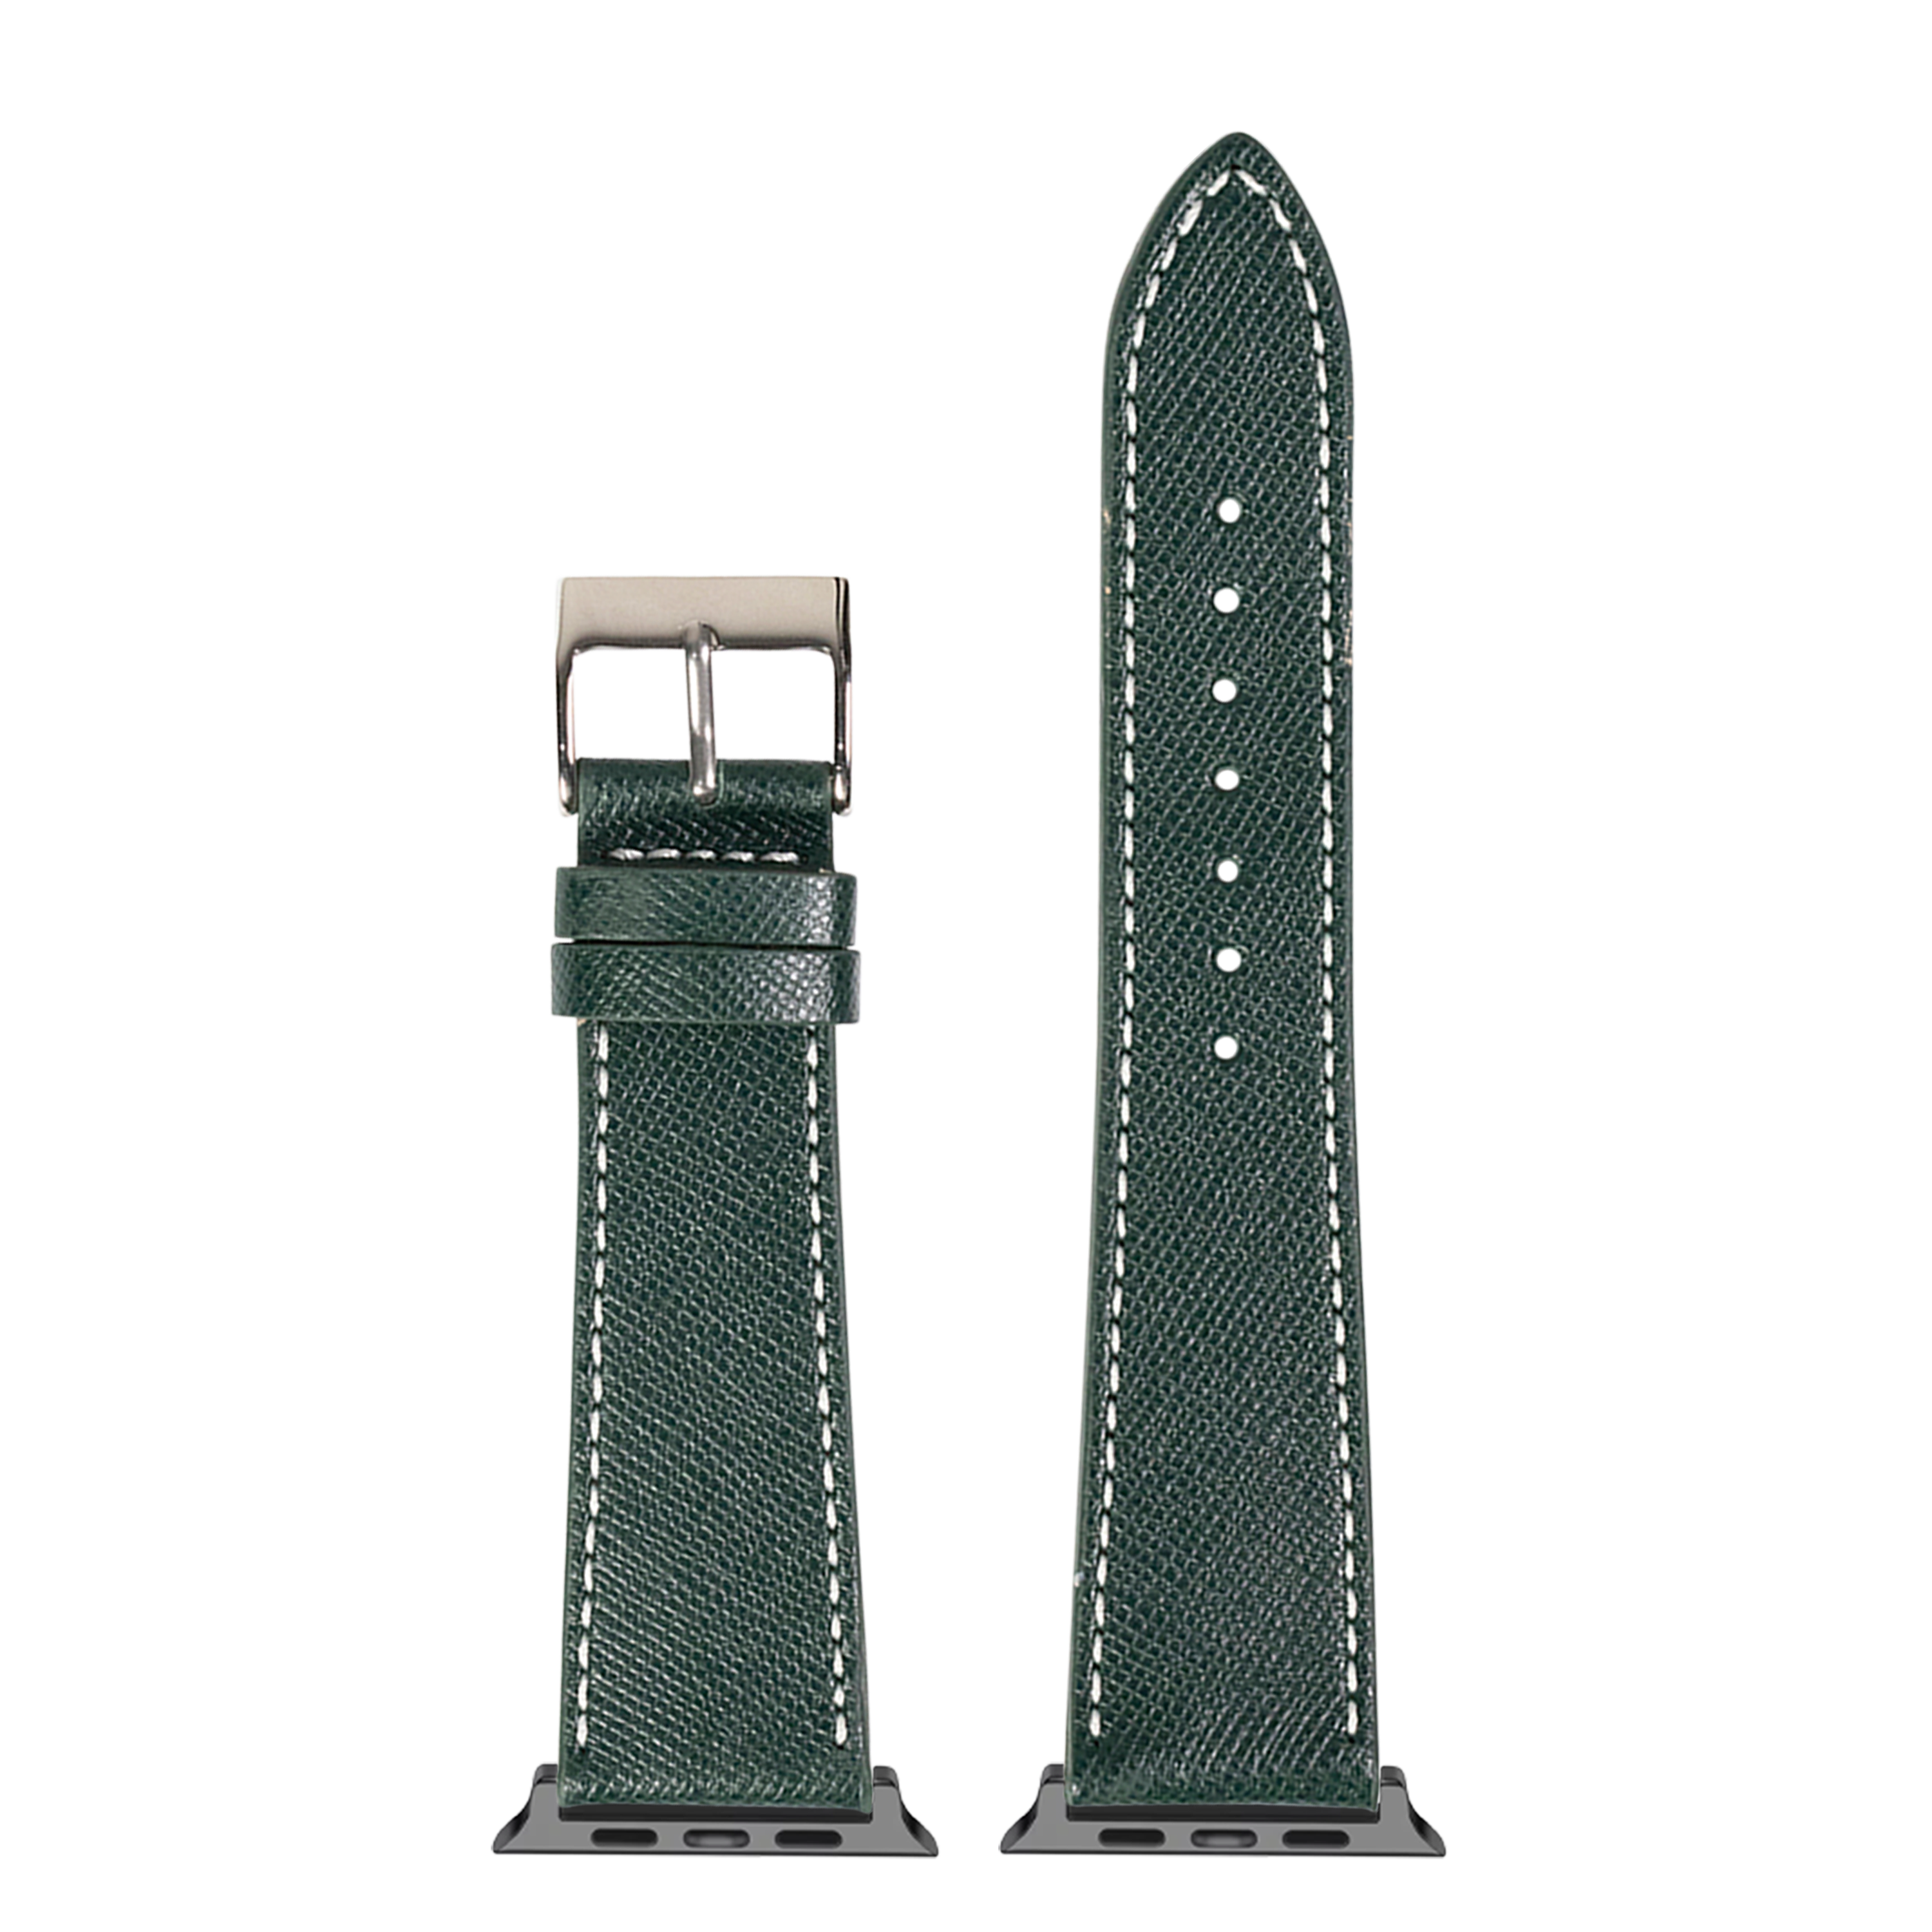 [Apple Watch] Saffiano Leather - Forest Green with White Stitching